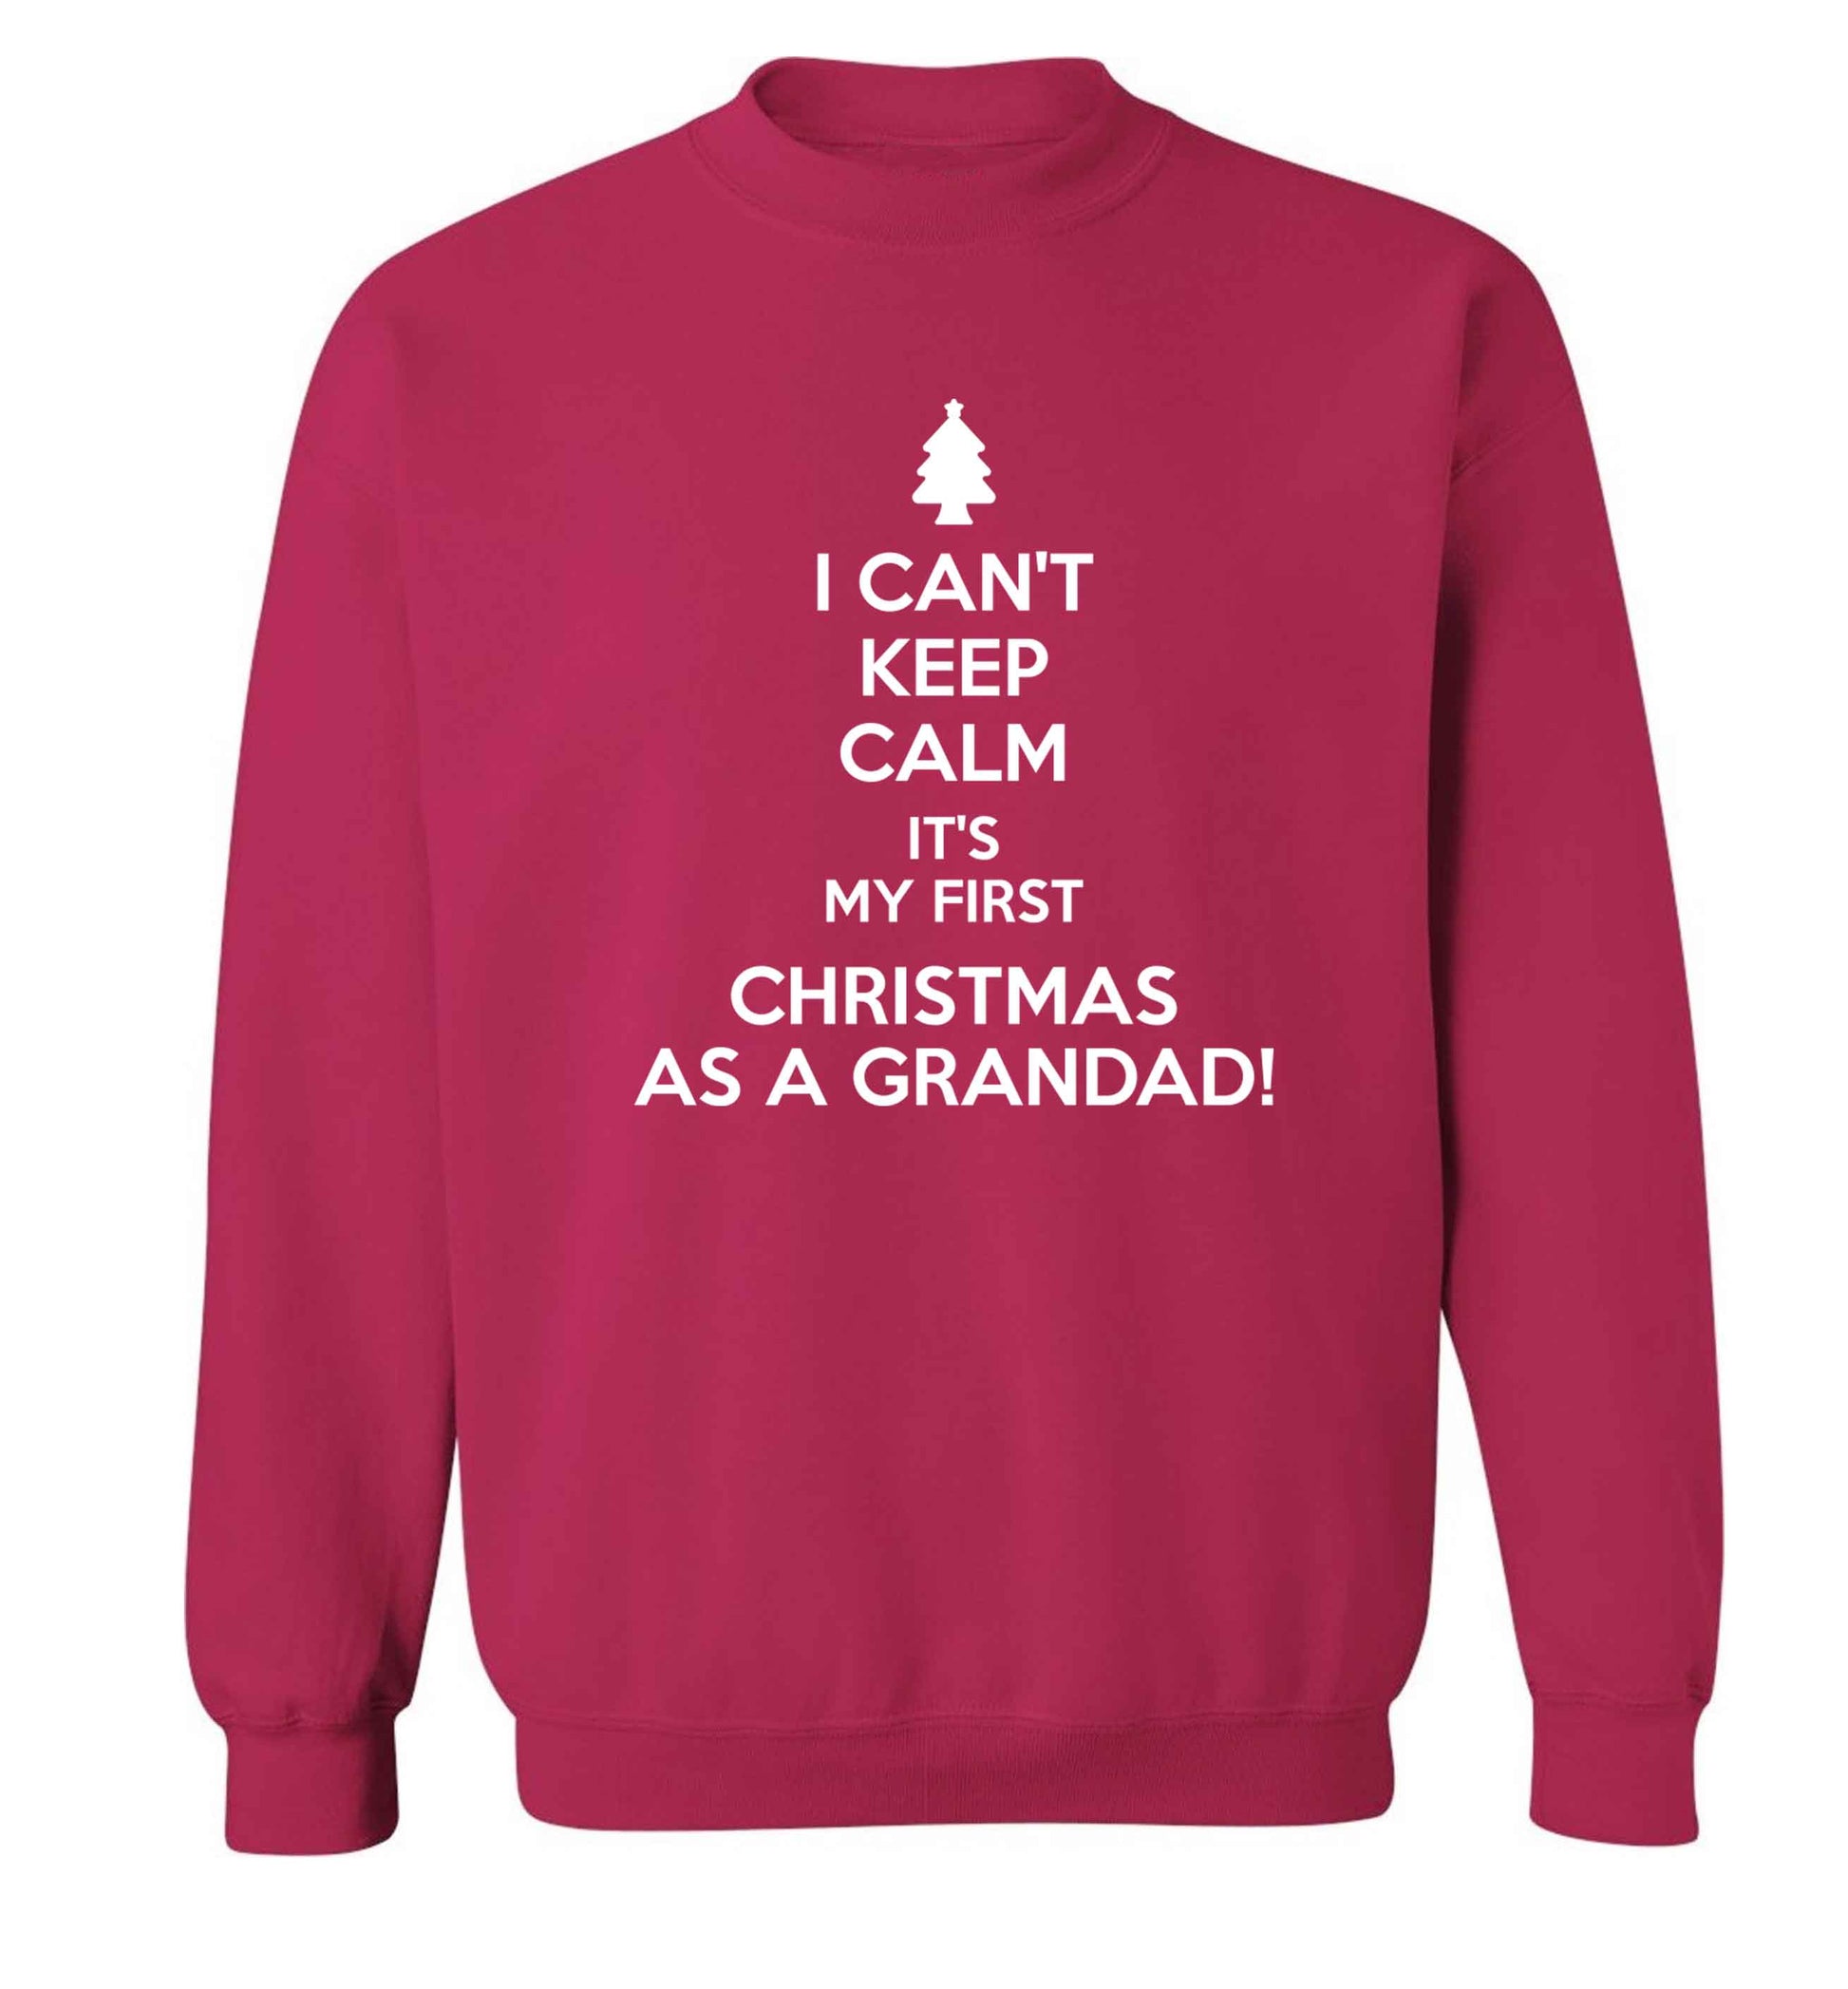 I can't keep calm it's my first Christmas as a grandad! Adult's unisex pink Sweater 2XL